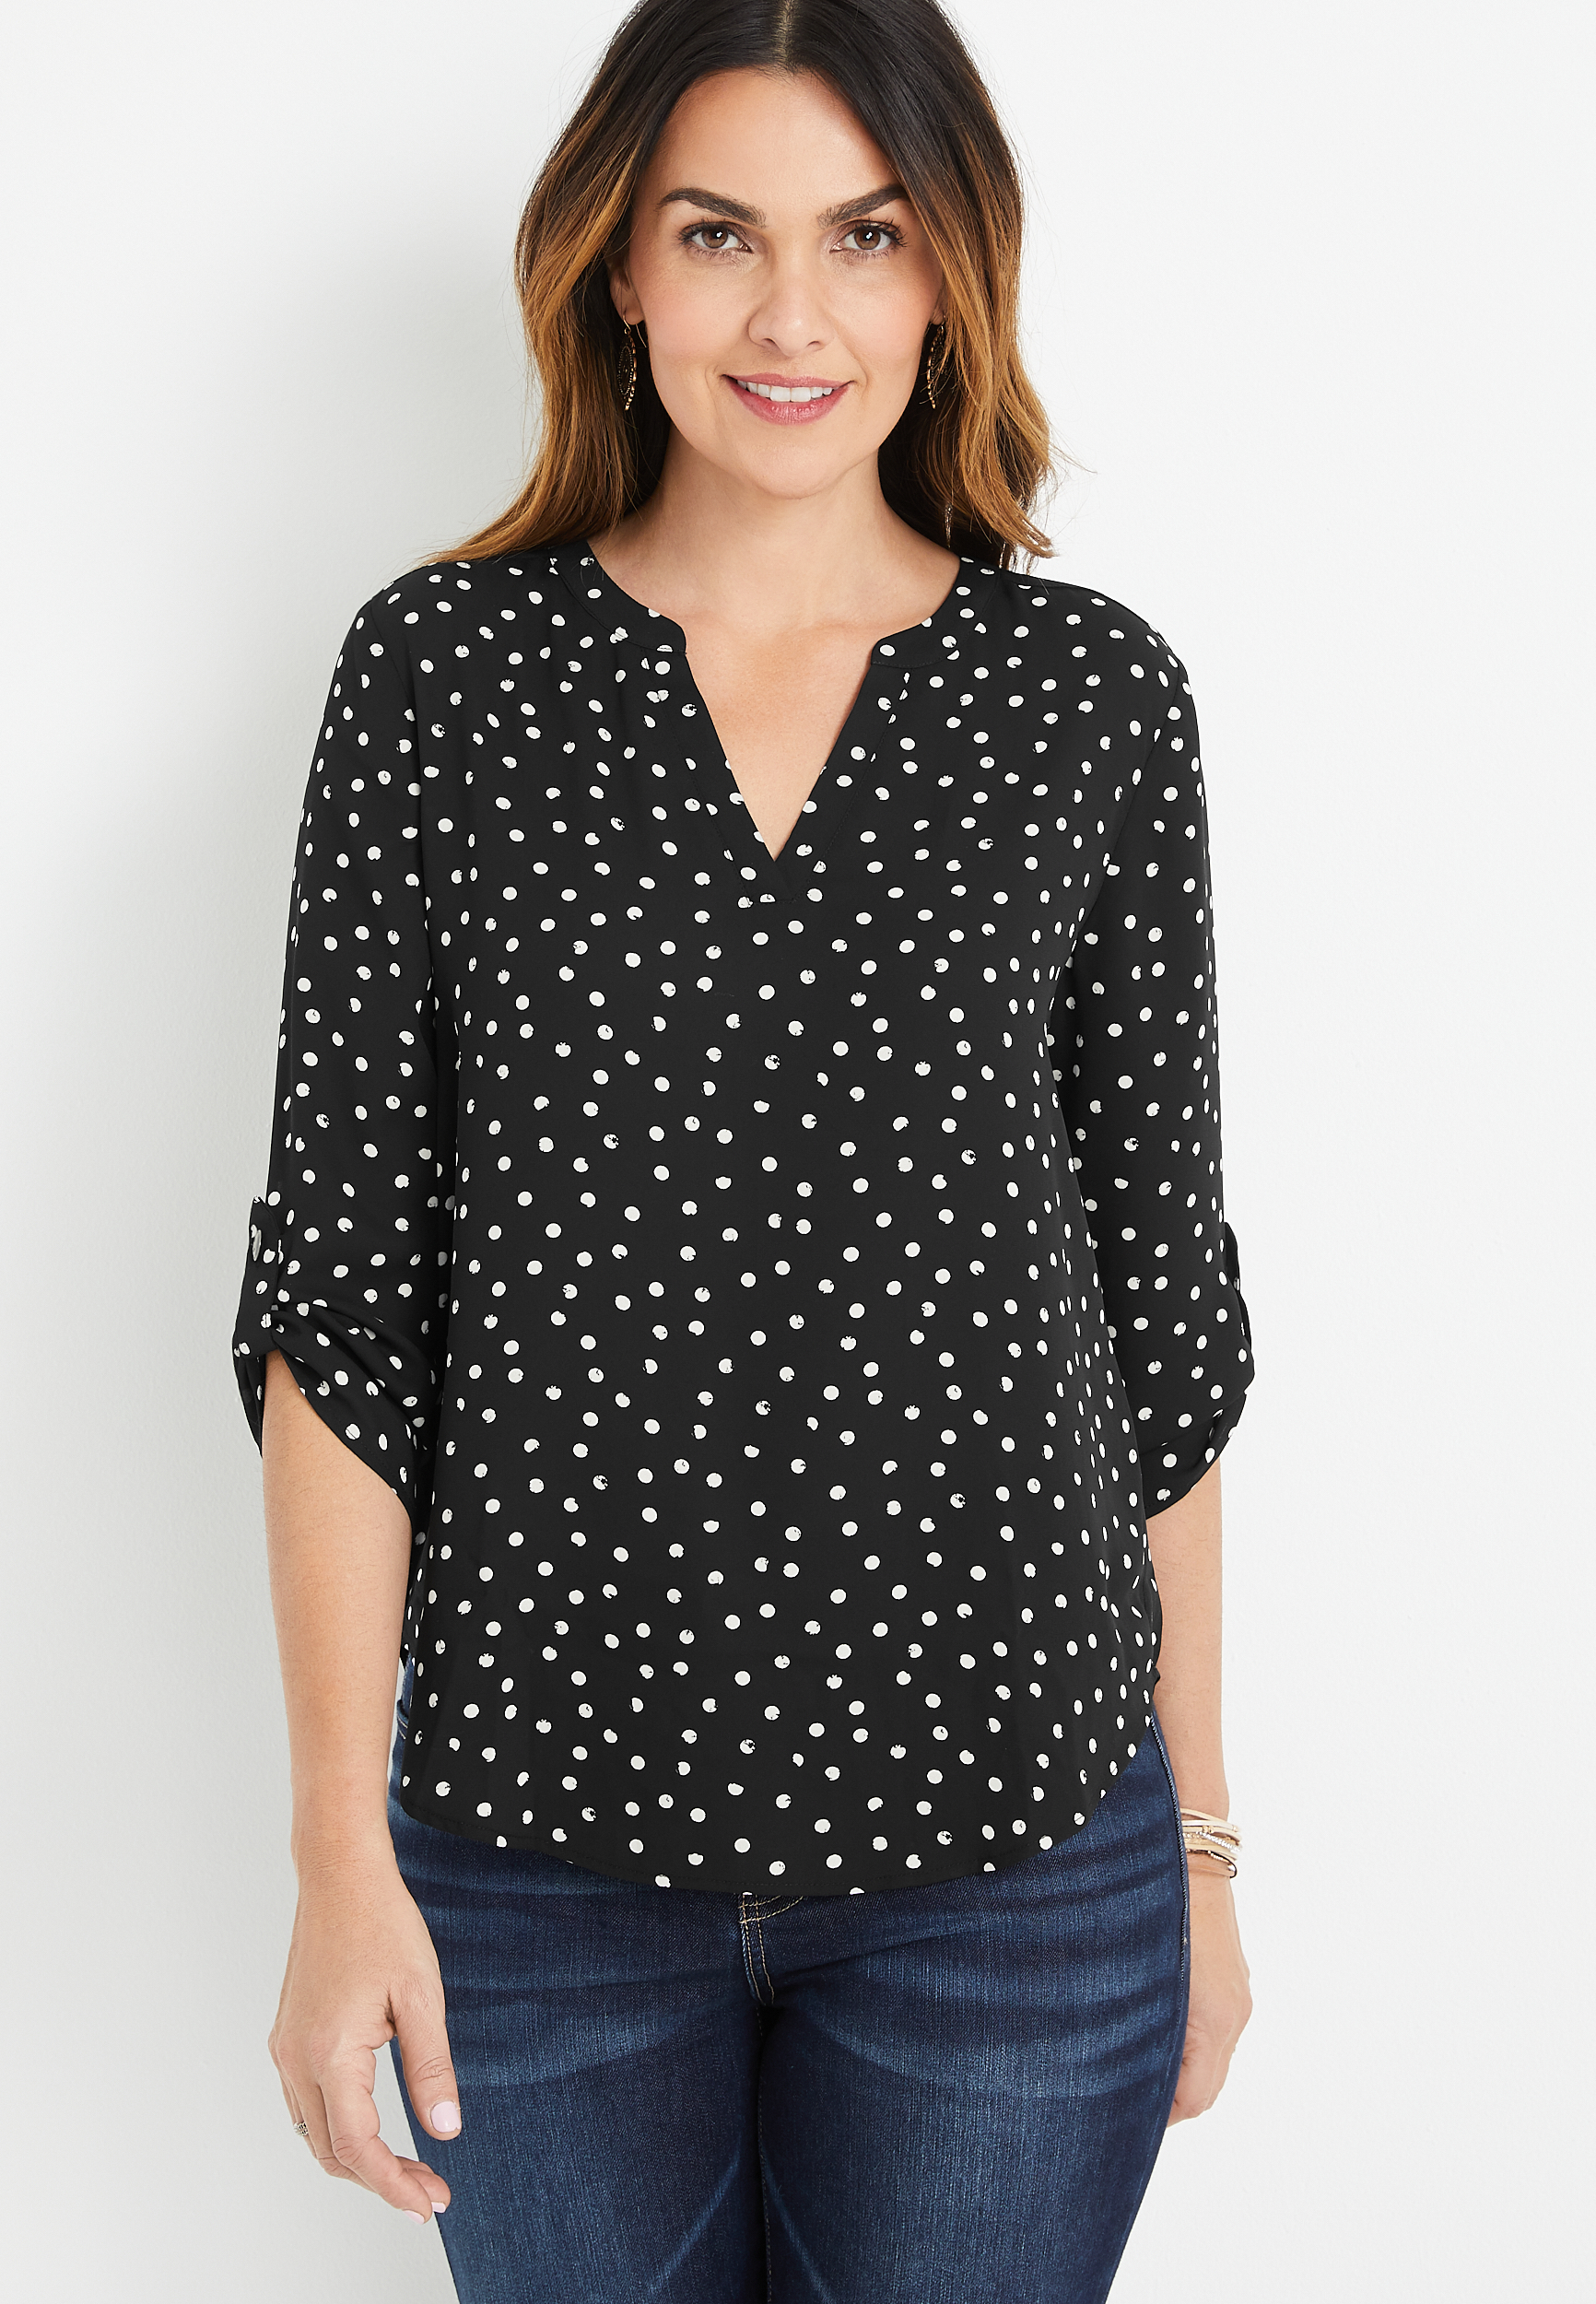 Atwood Polka Dot 3/4 Sleeve Popover Blouse | maurices